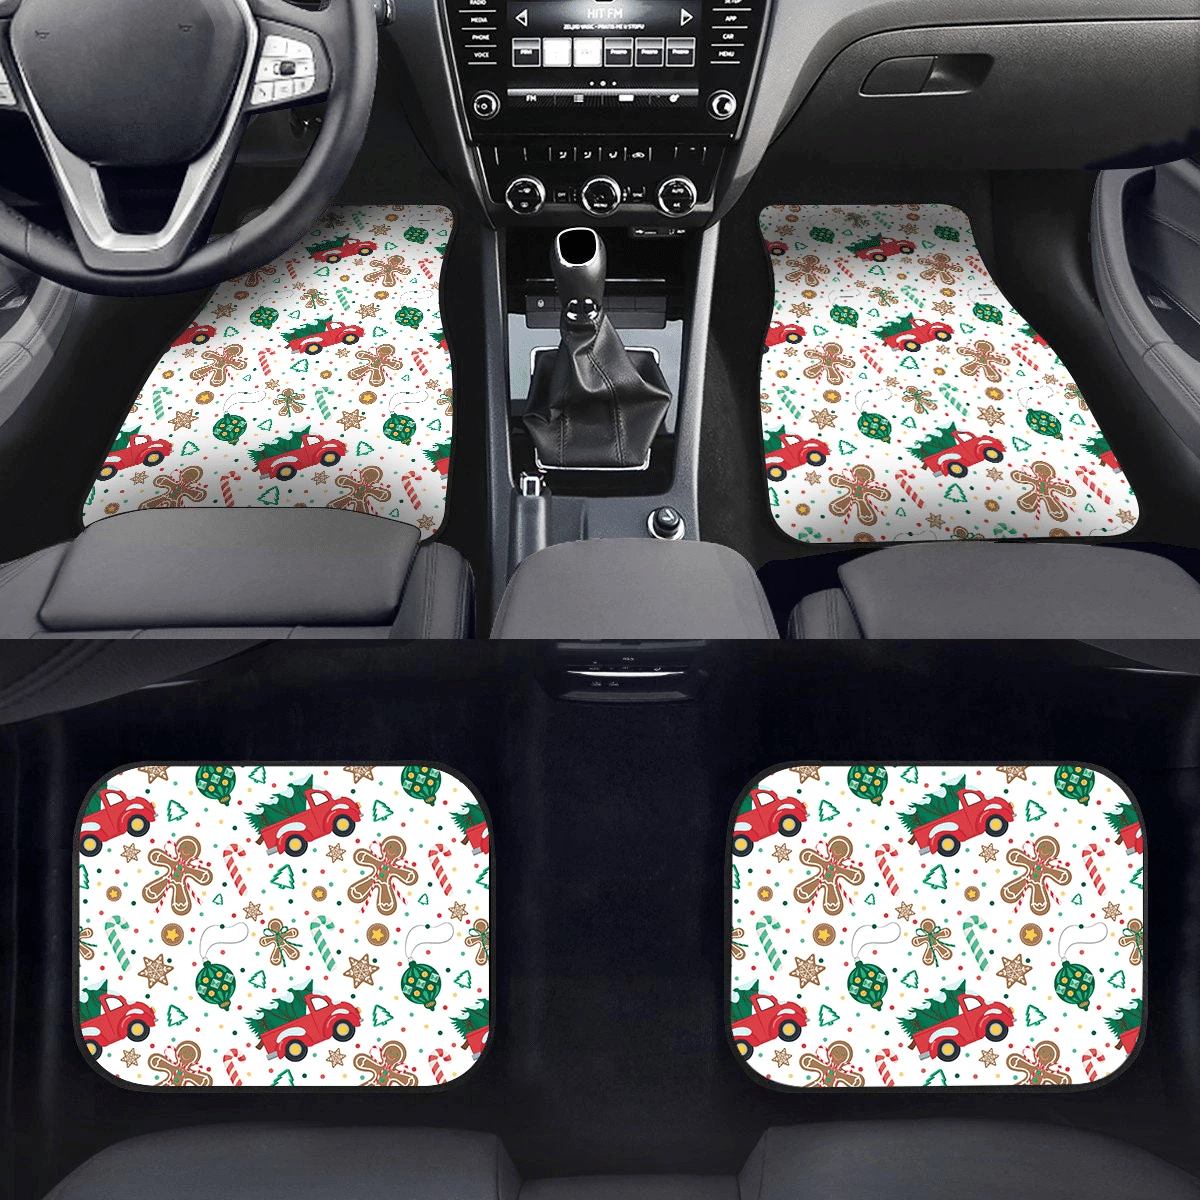 Sweet Cookies Candy And Vintage Red Truck Pattern Car Mats Car Floor Mats